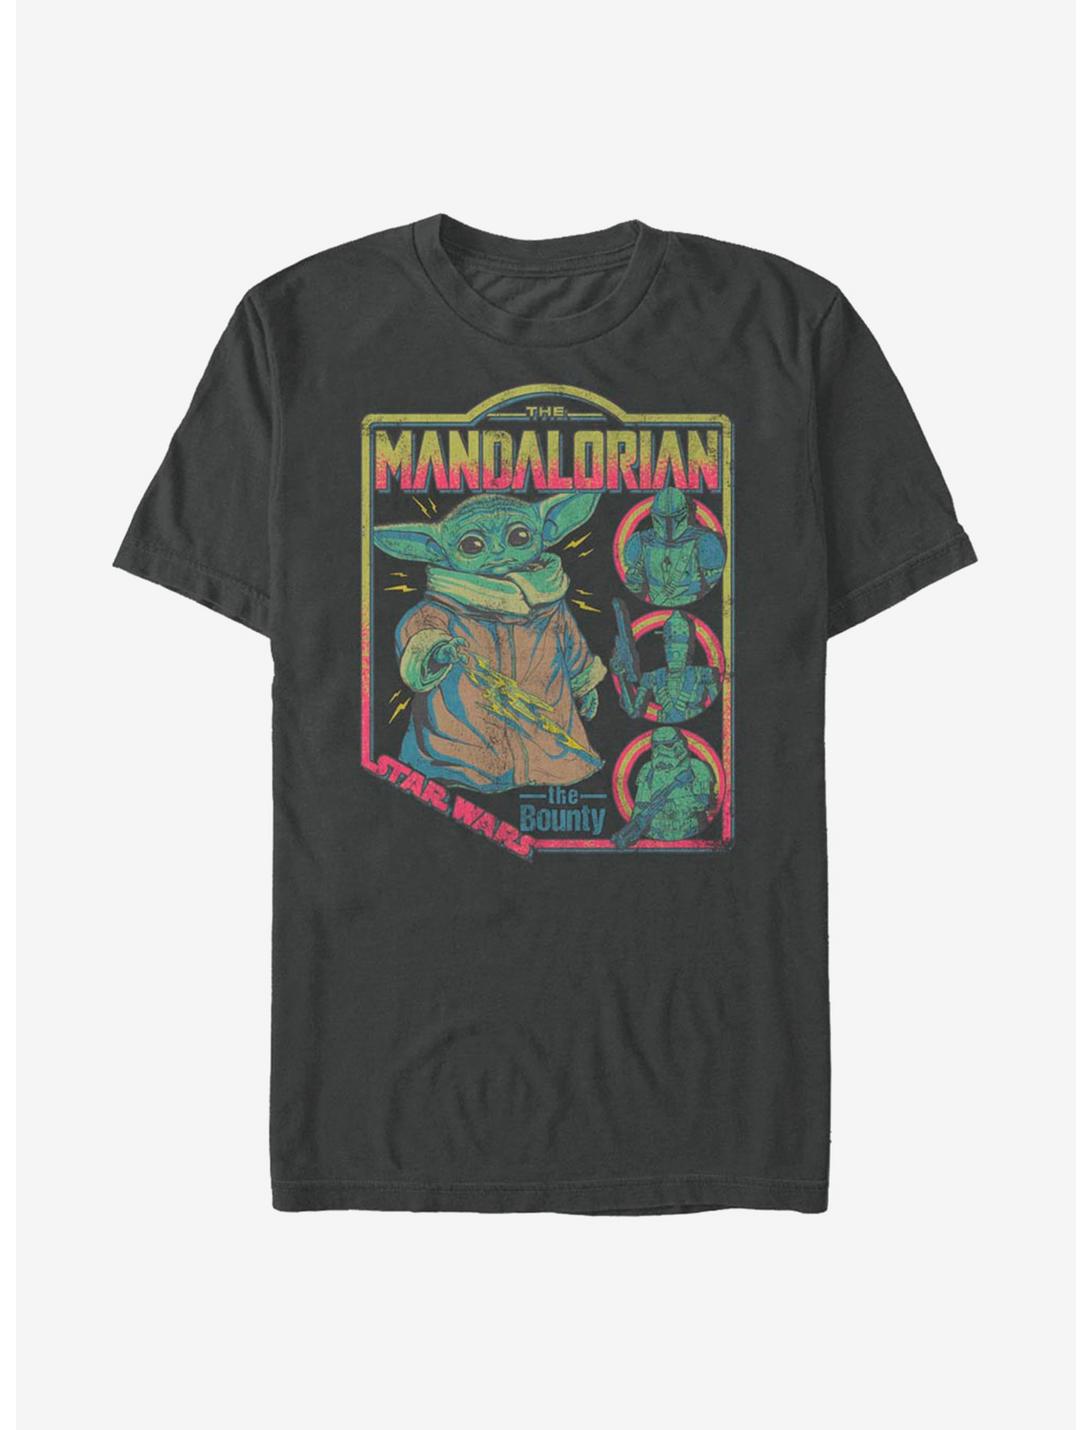 Star Wars The Mandalorian The Child Poster T-Shirt, CHARCOAL, hi-res